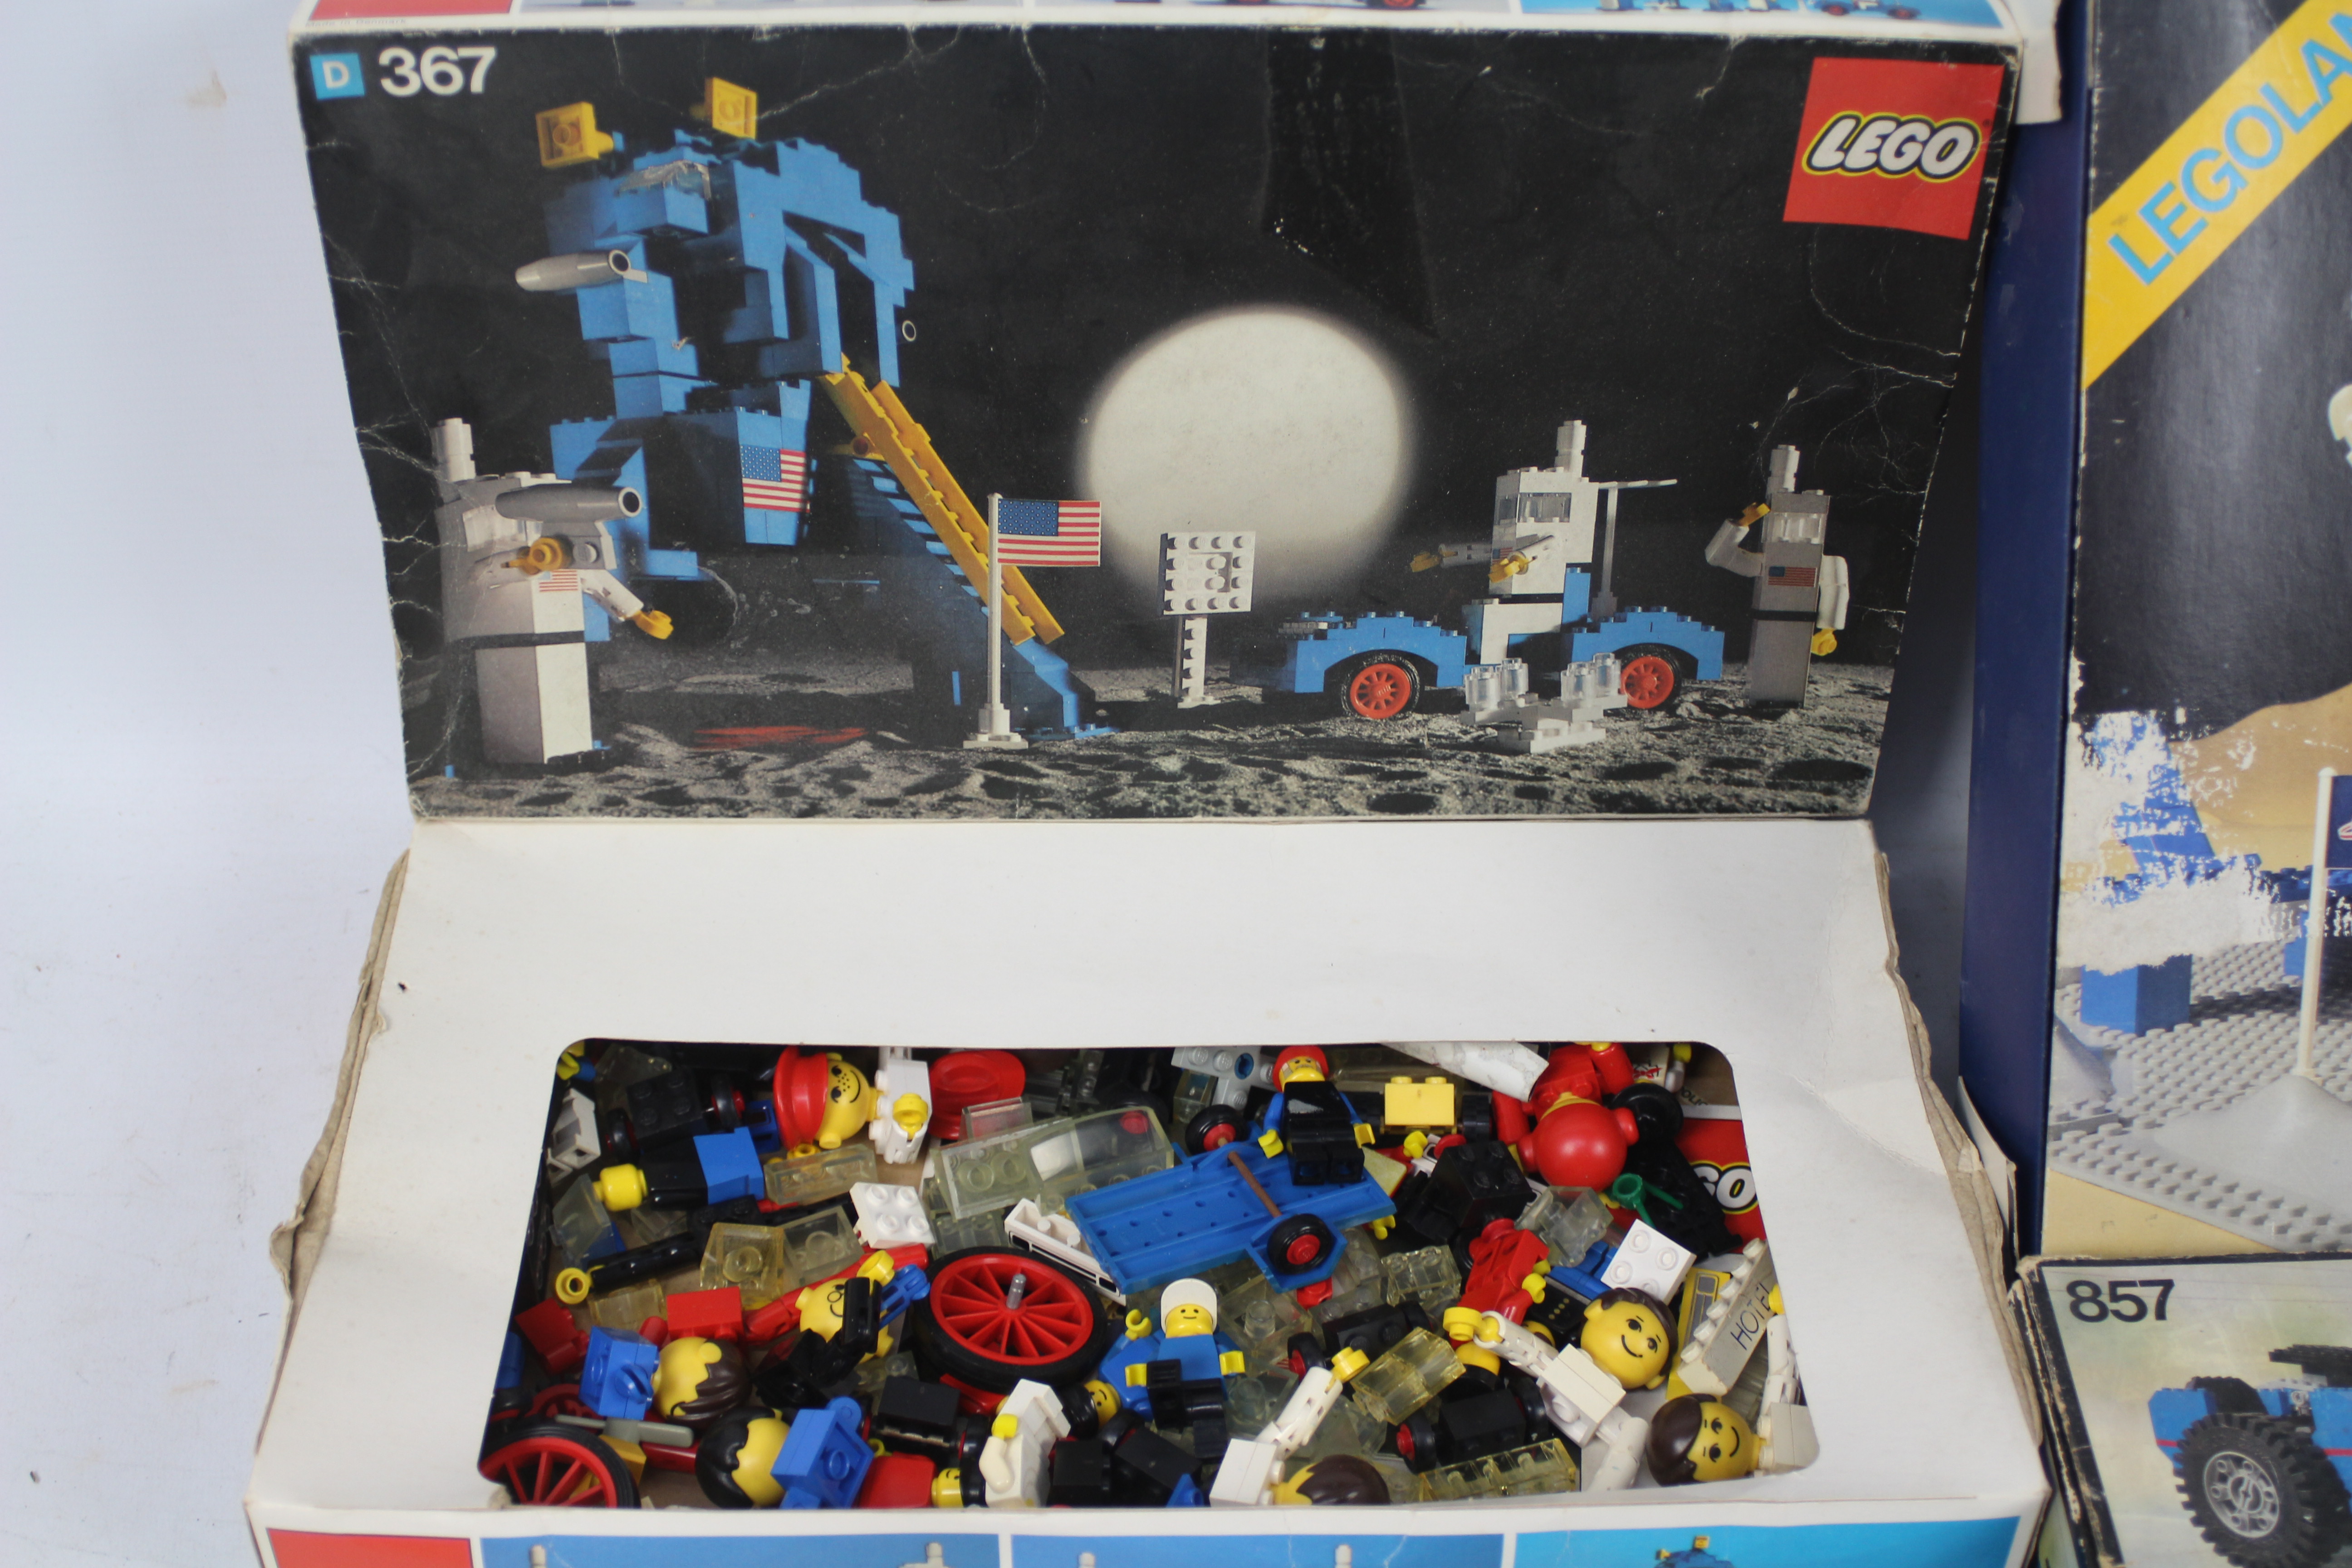 Lego - 3 x vintage Lego boxed sets, Moon Landing set dated 1975, Space Centre dated 1981, - Image 5 of 9